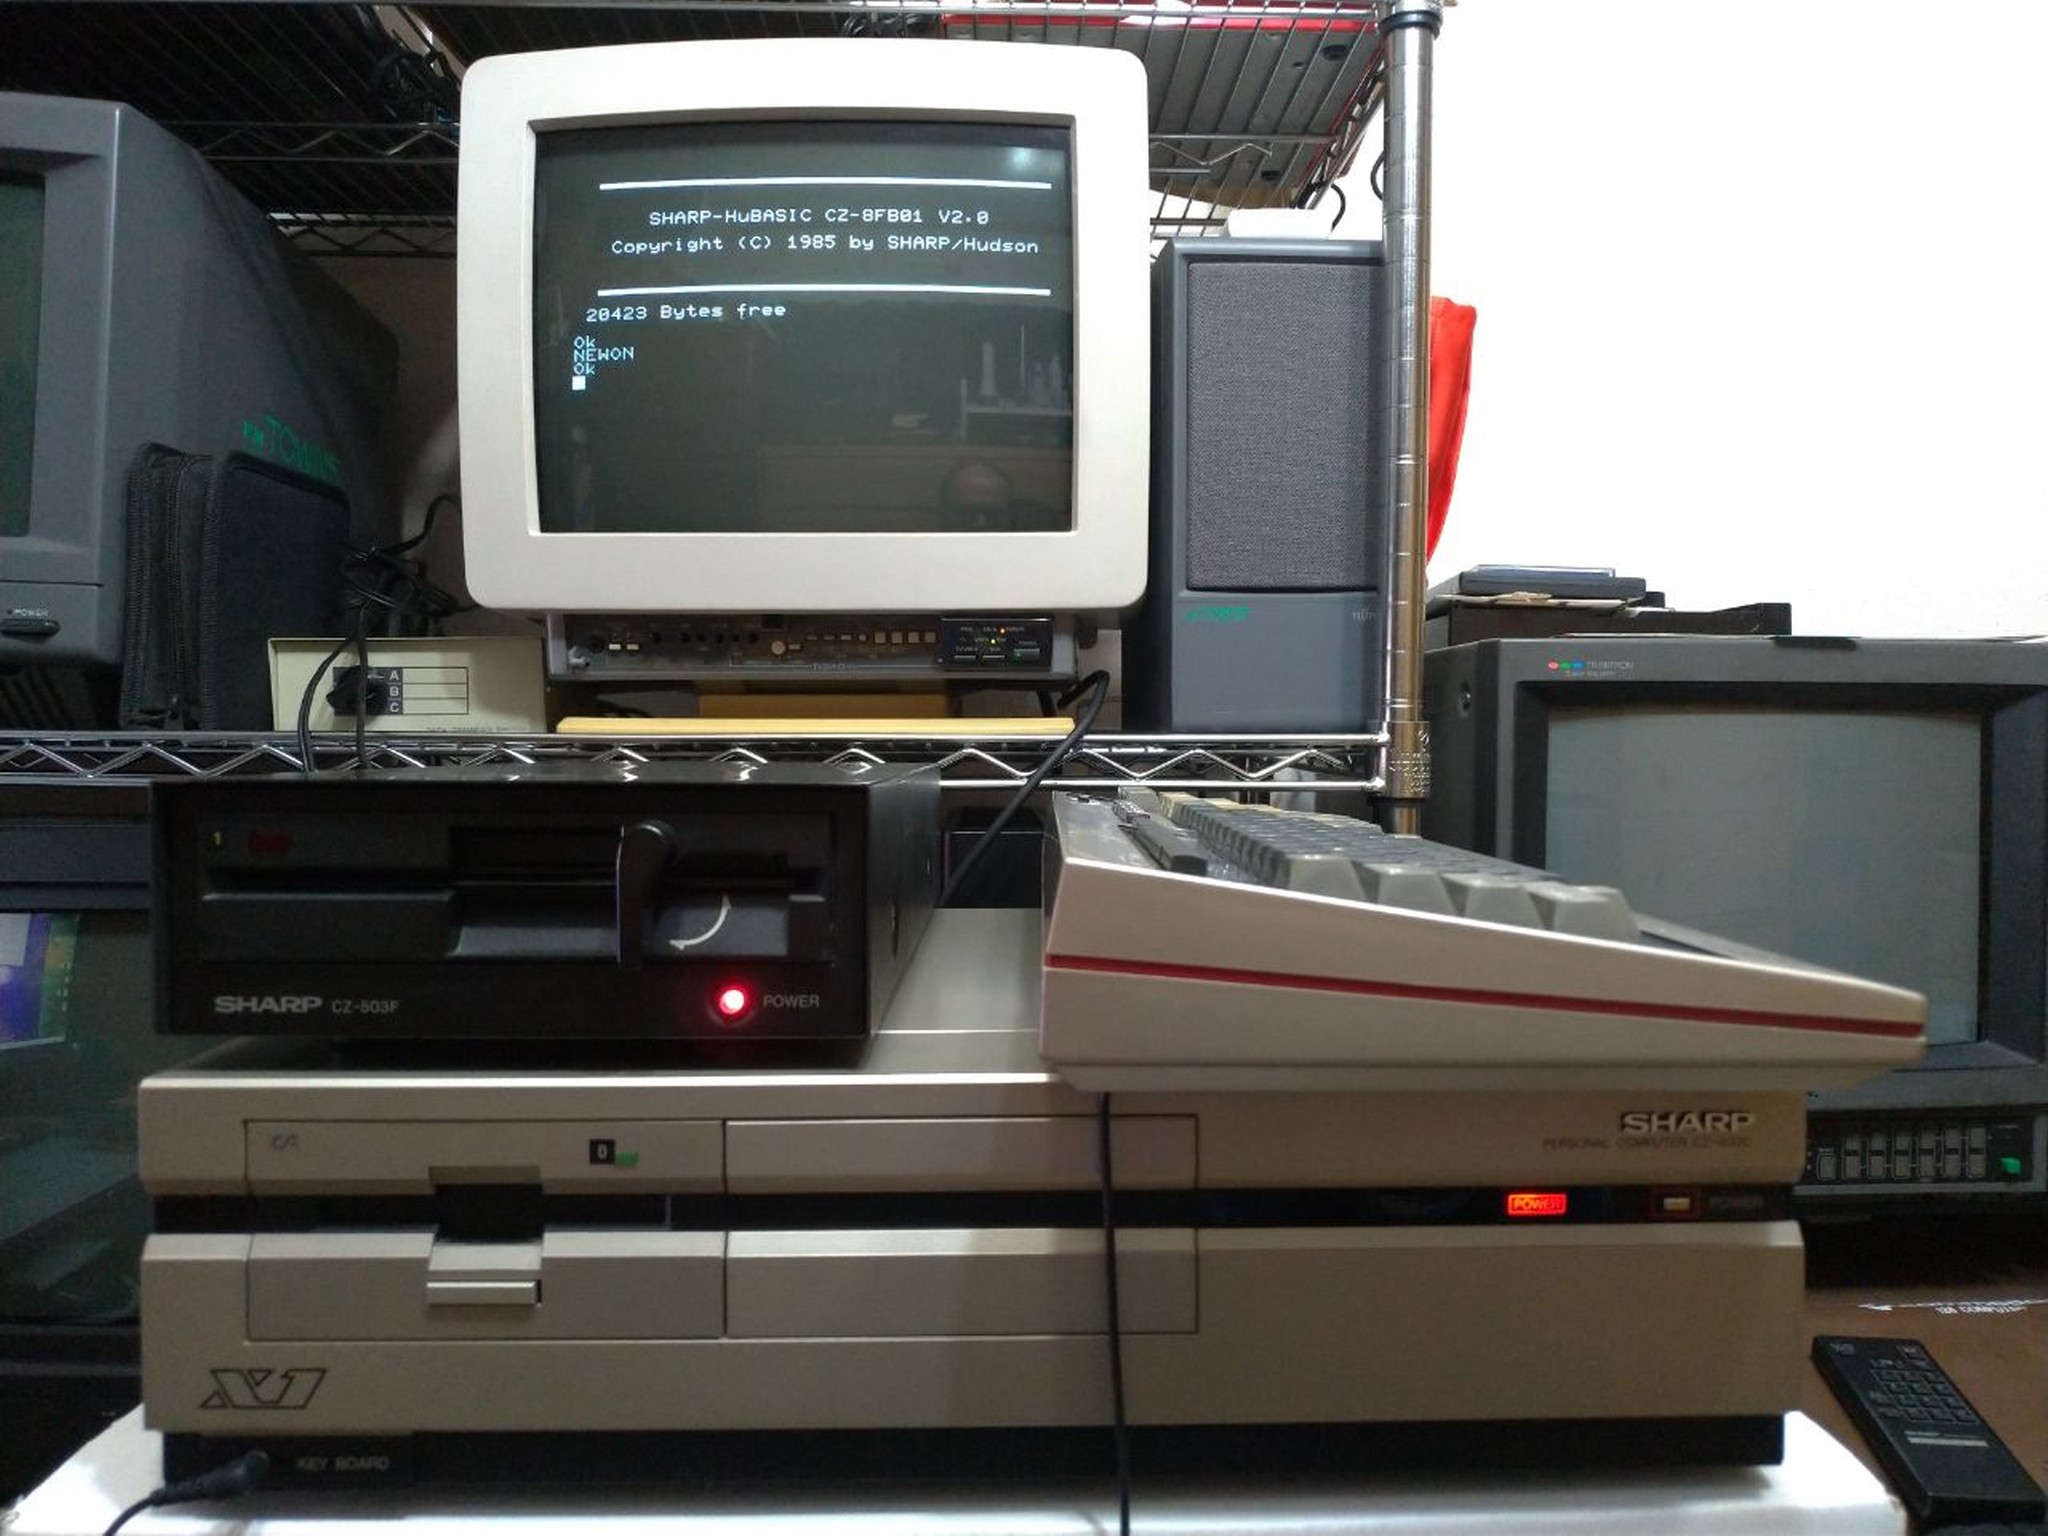 Sharp X1 Floppy Drives – Japanese Vintage Computer Collection